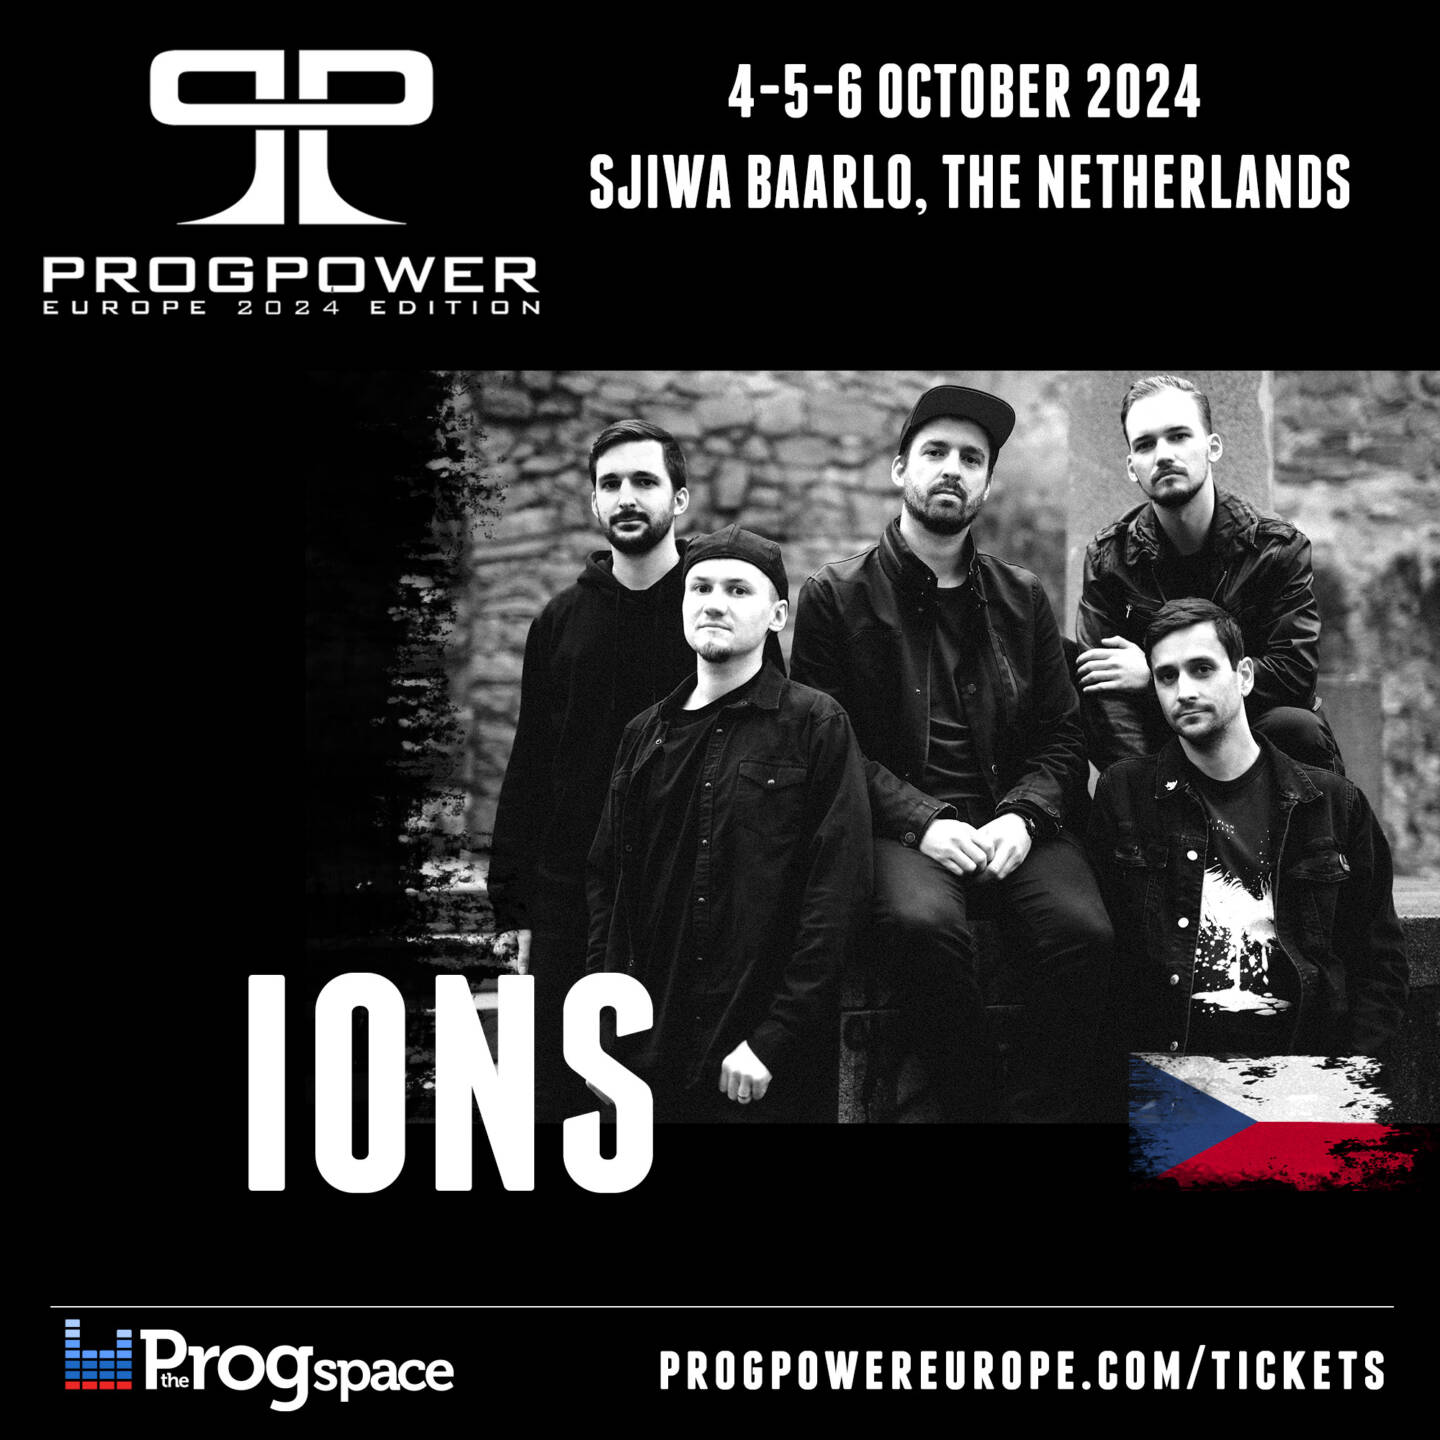 ProgPower Europe 2024 first band announced: IONS from Czechia!